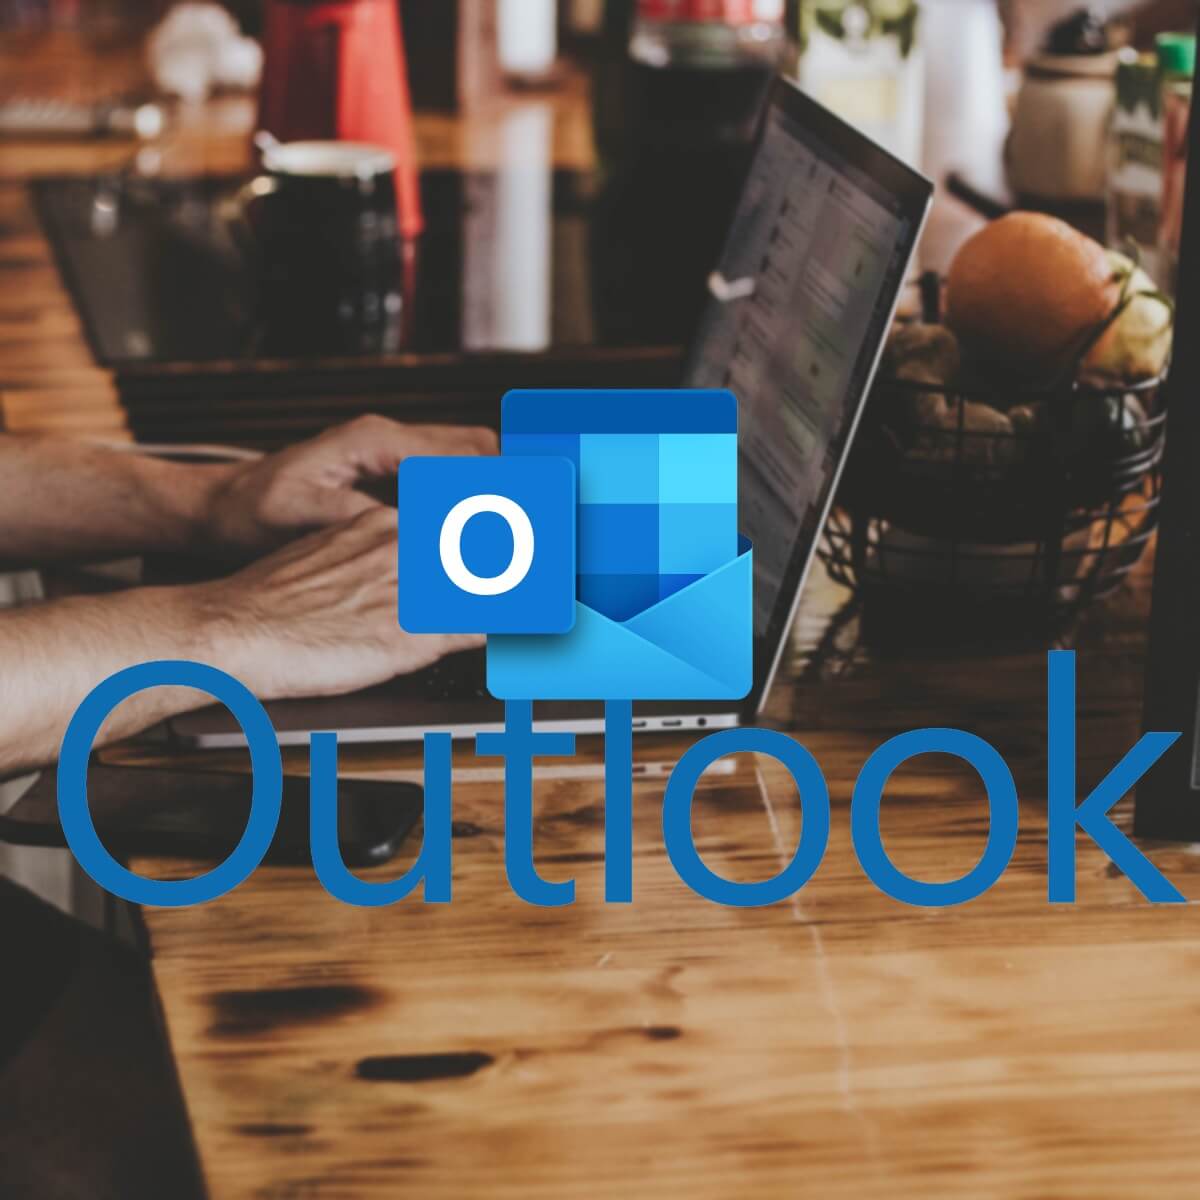 hotmail account disconnected in outlook